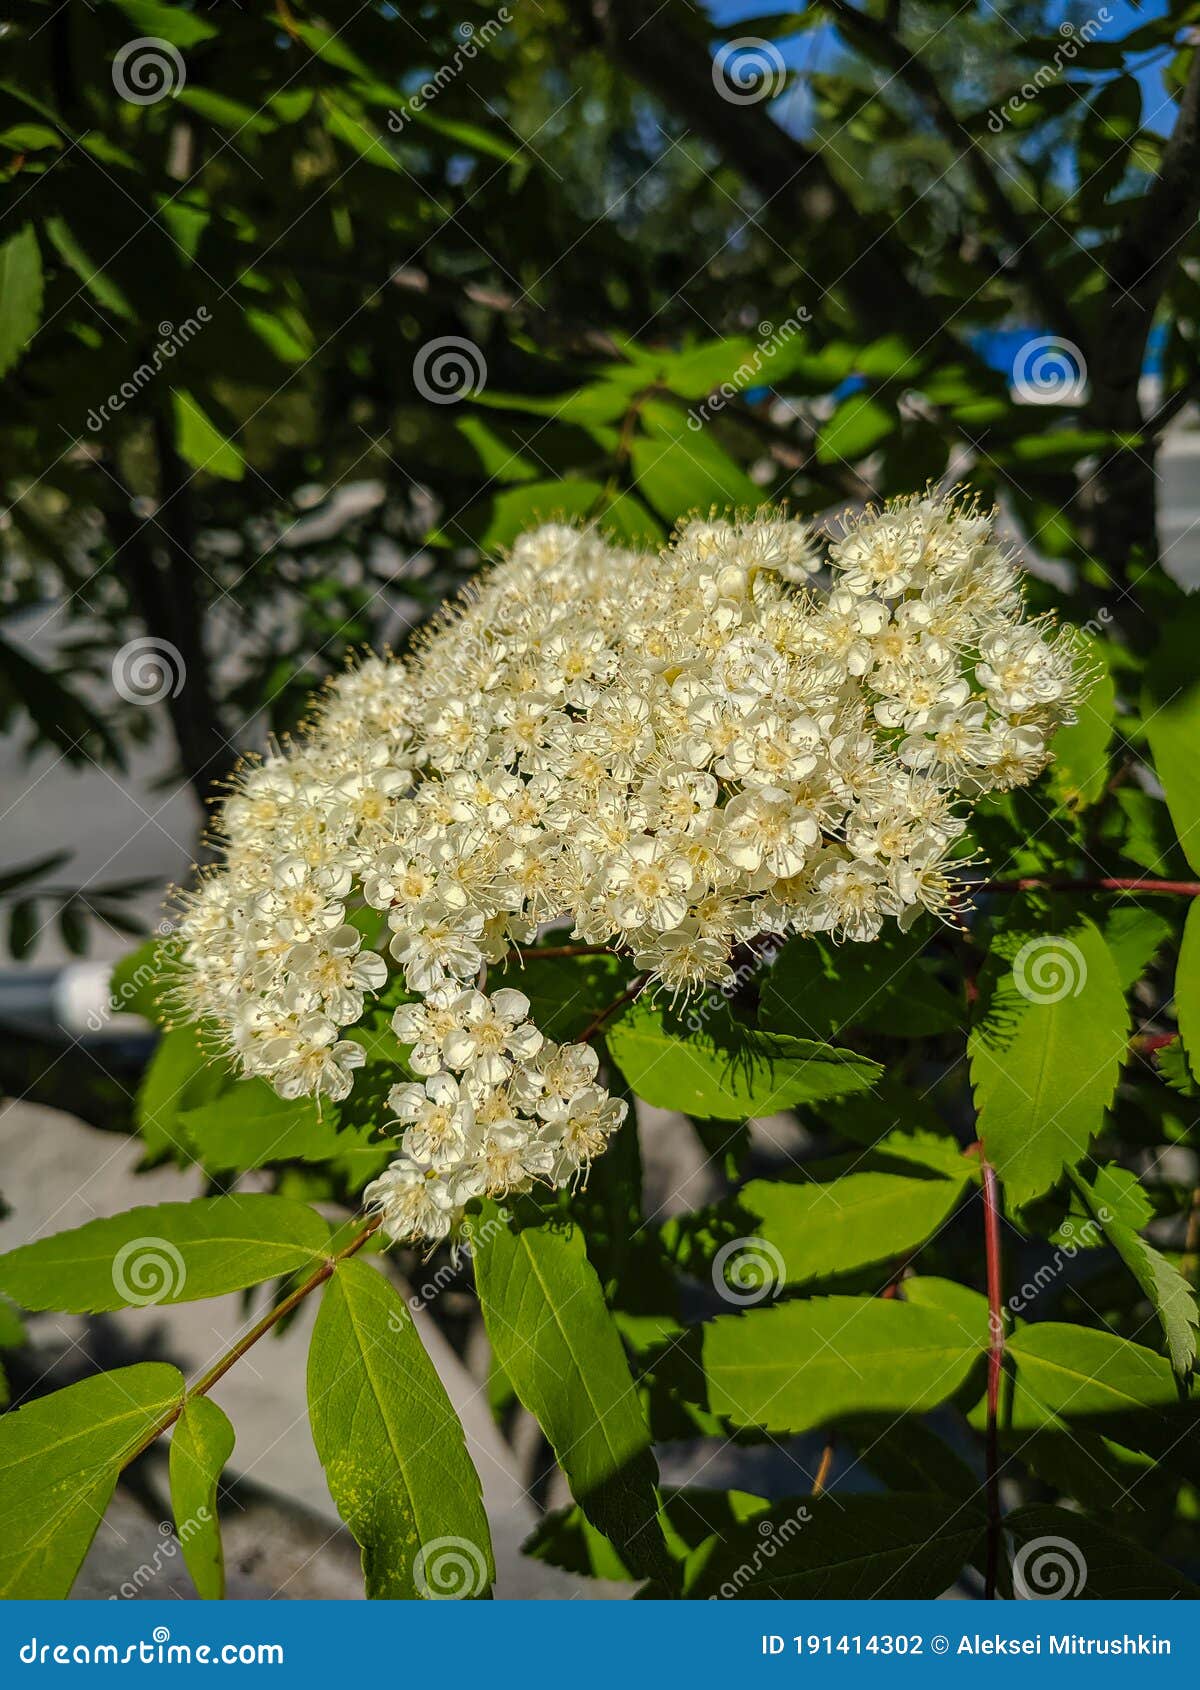 Noyabrsk, Russia - May 30, 2020: White Rowan Flowers with Green Leaves